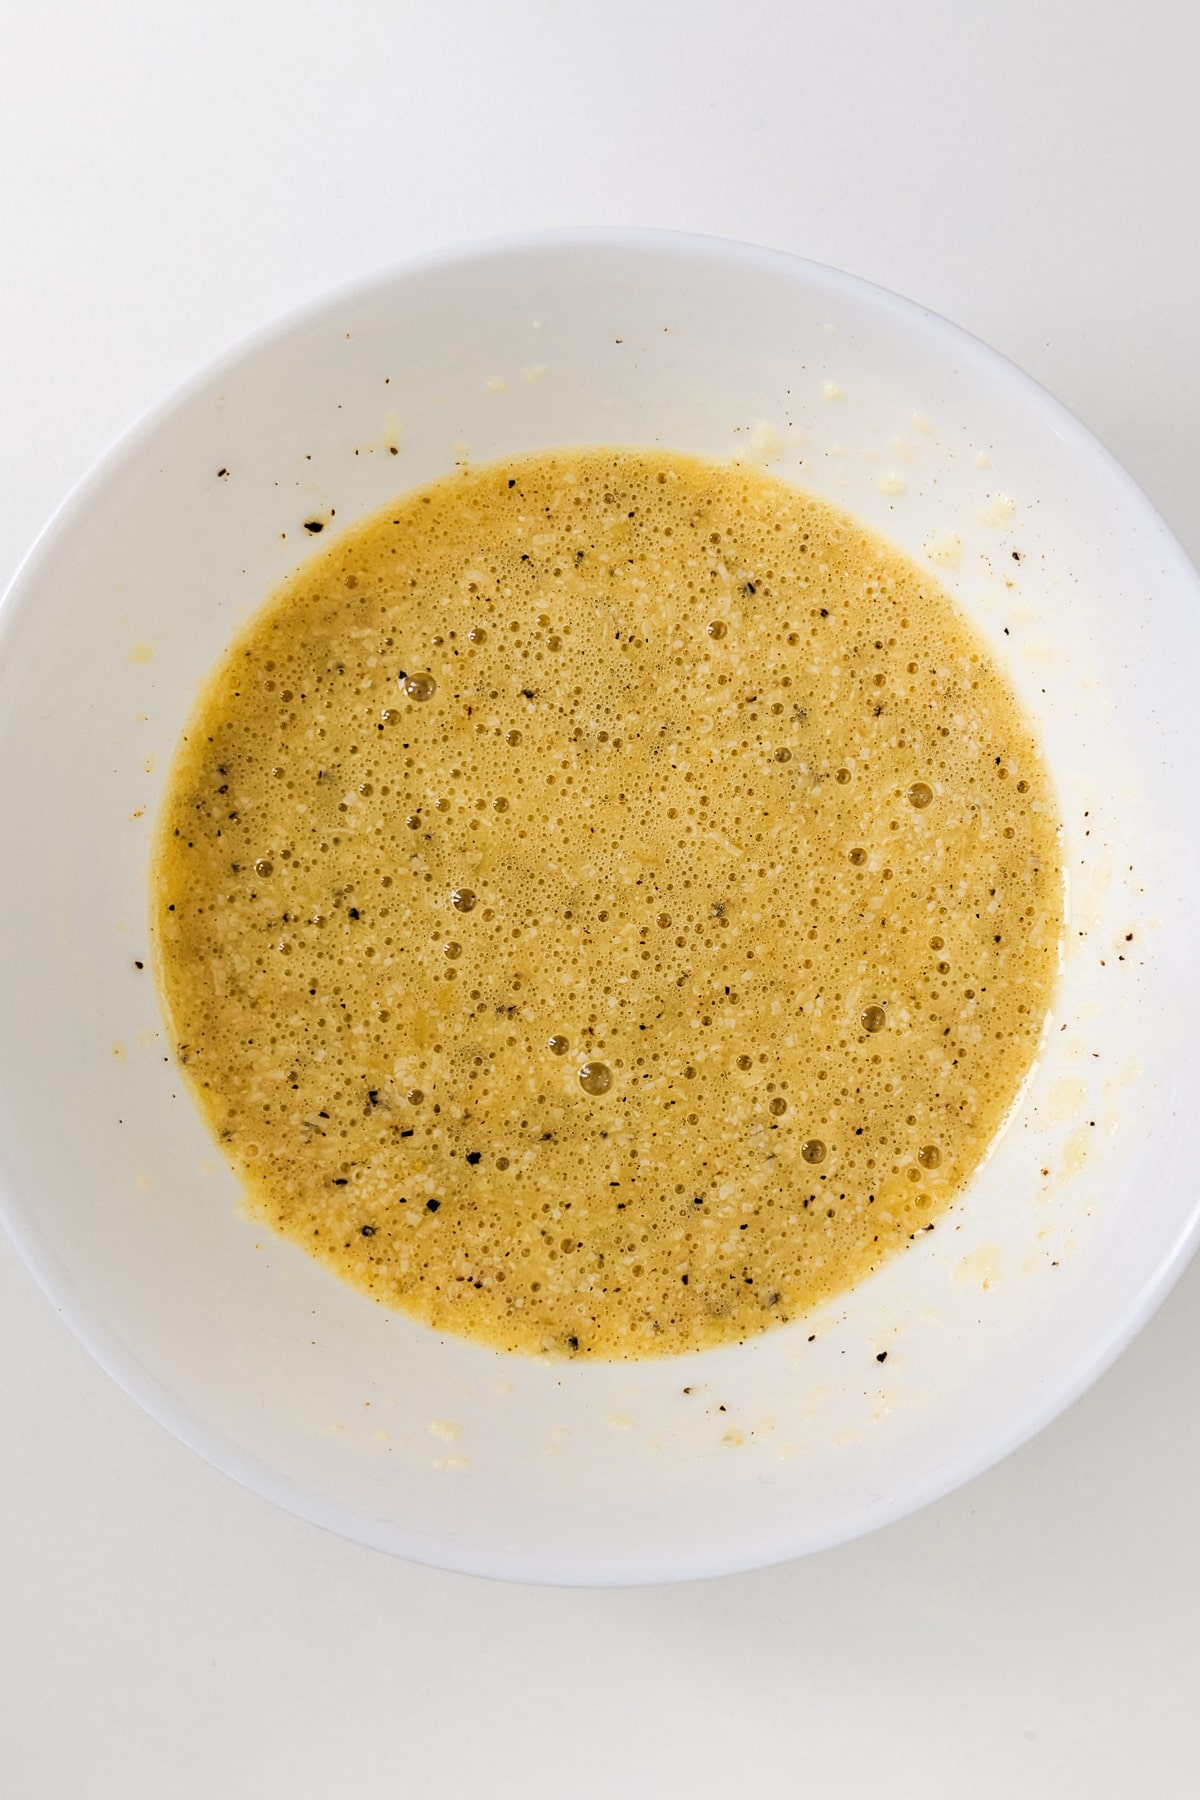 Top view of raw eggs mixed with parmesan cheese and black pepper.